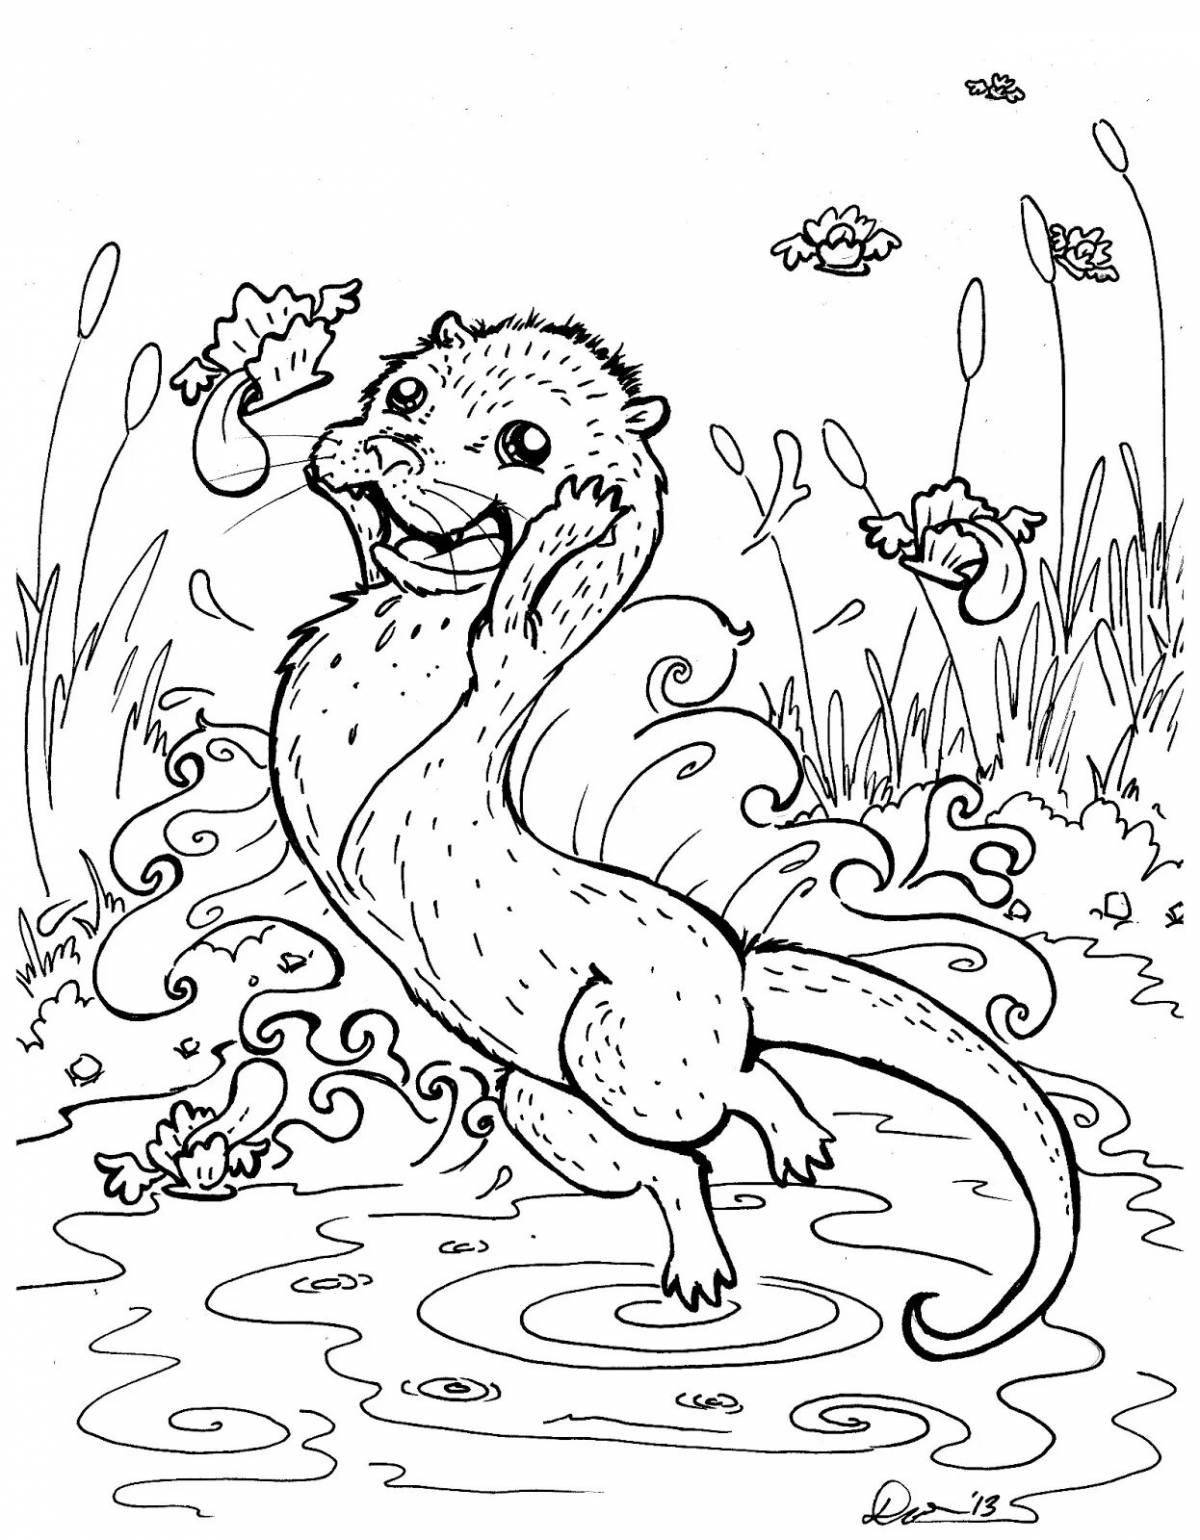 Charming otter coloring book for kids